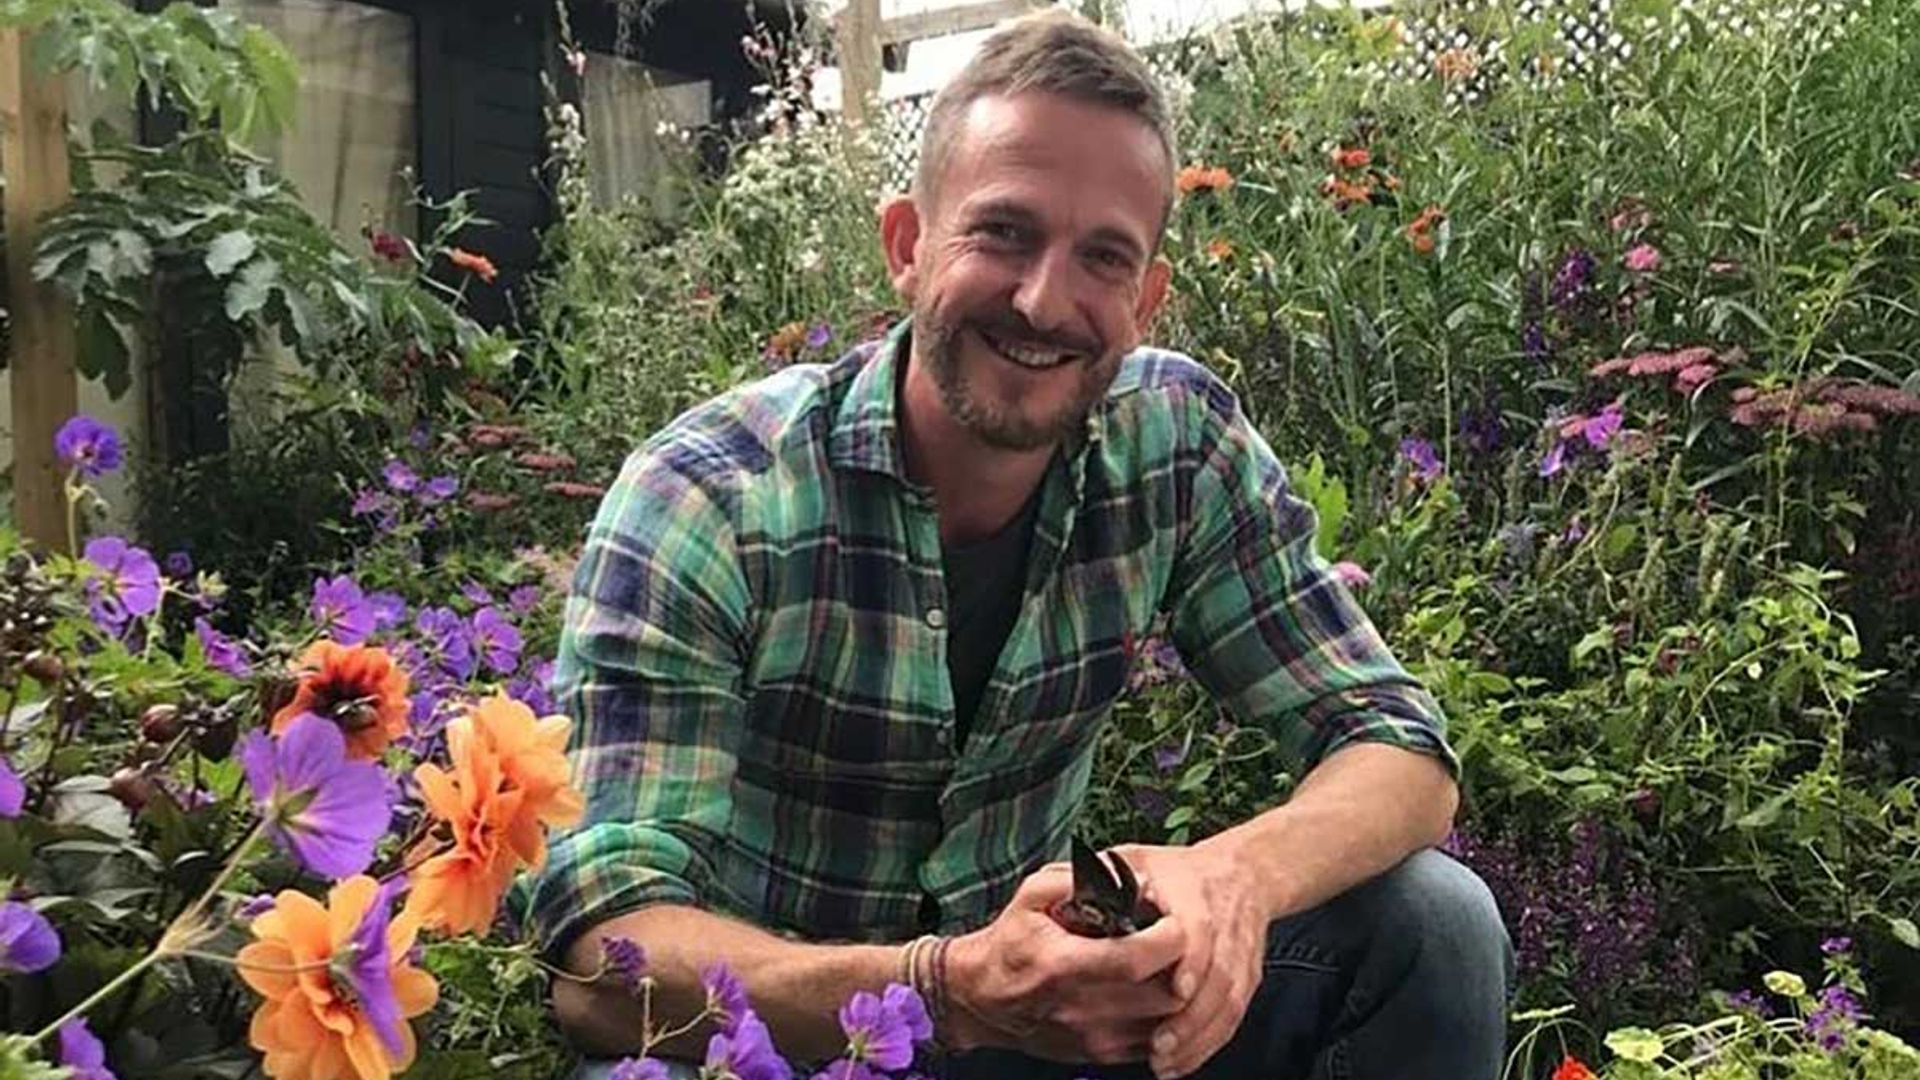 Gardeners' World: who is Nick Bailey? All you need to know about the presenter